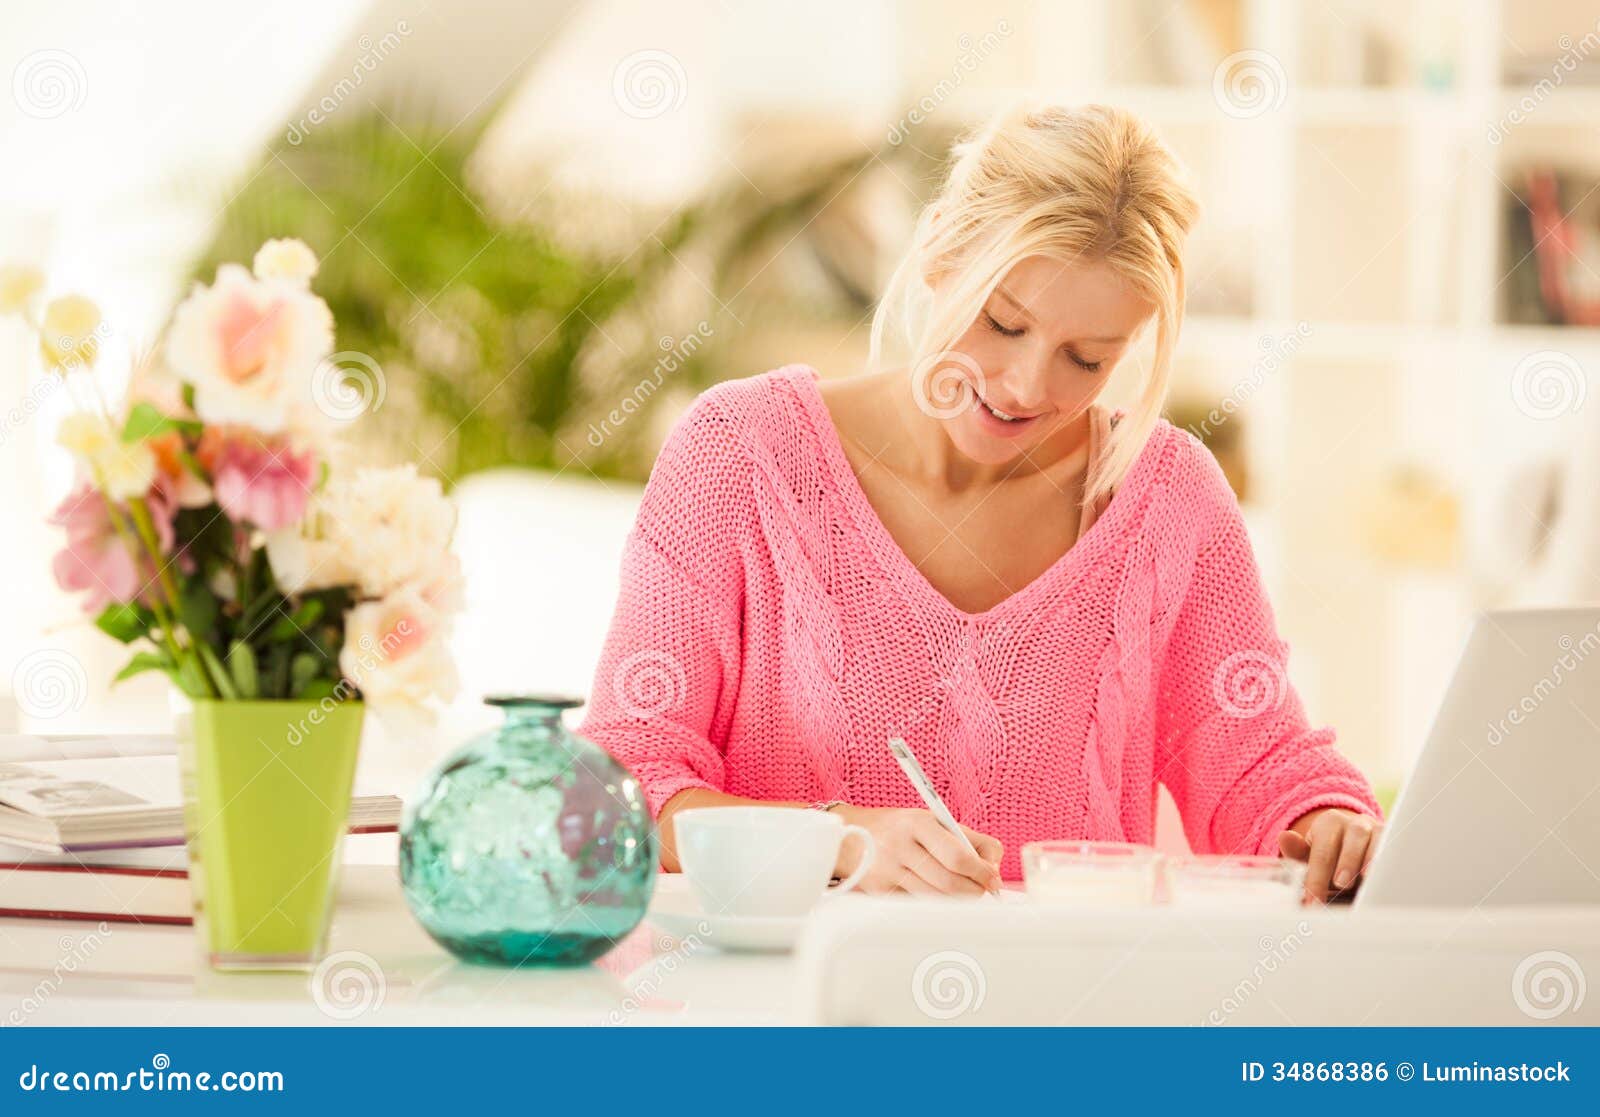 Blonde woman writing at desk - wide 3